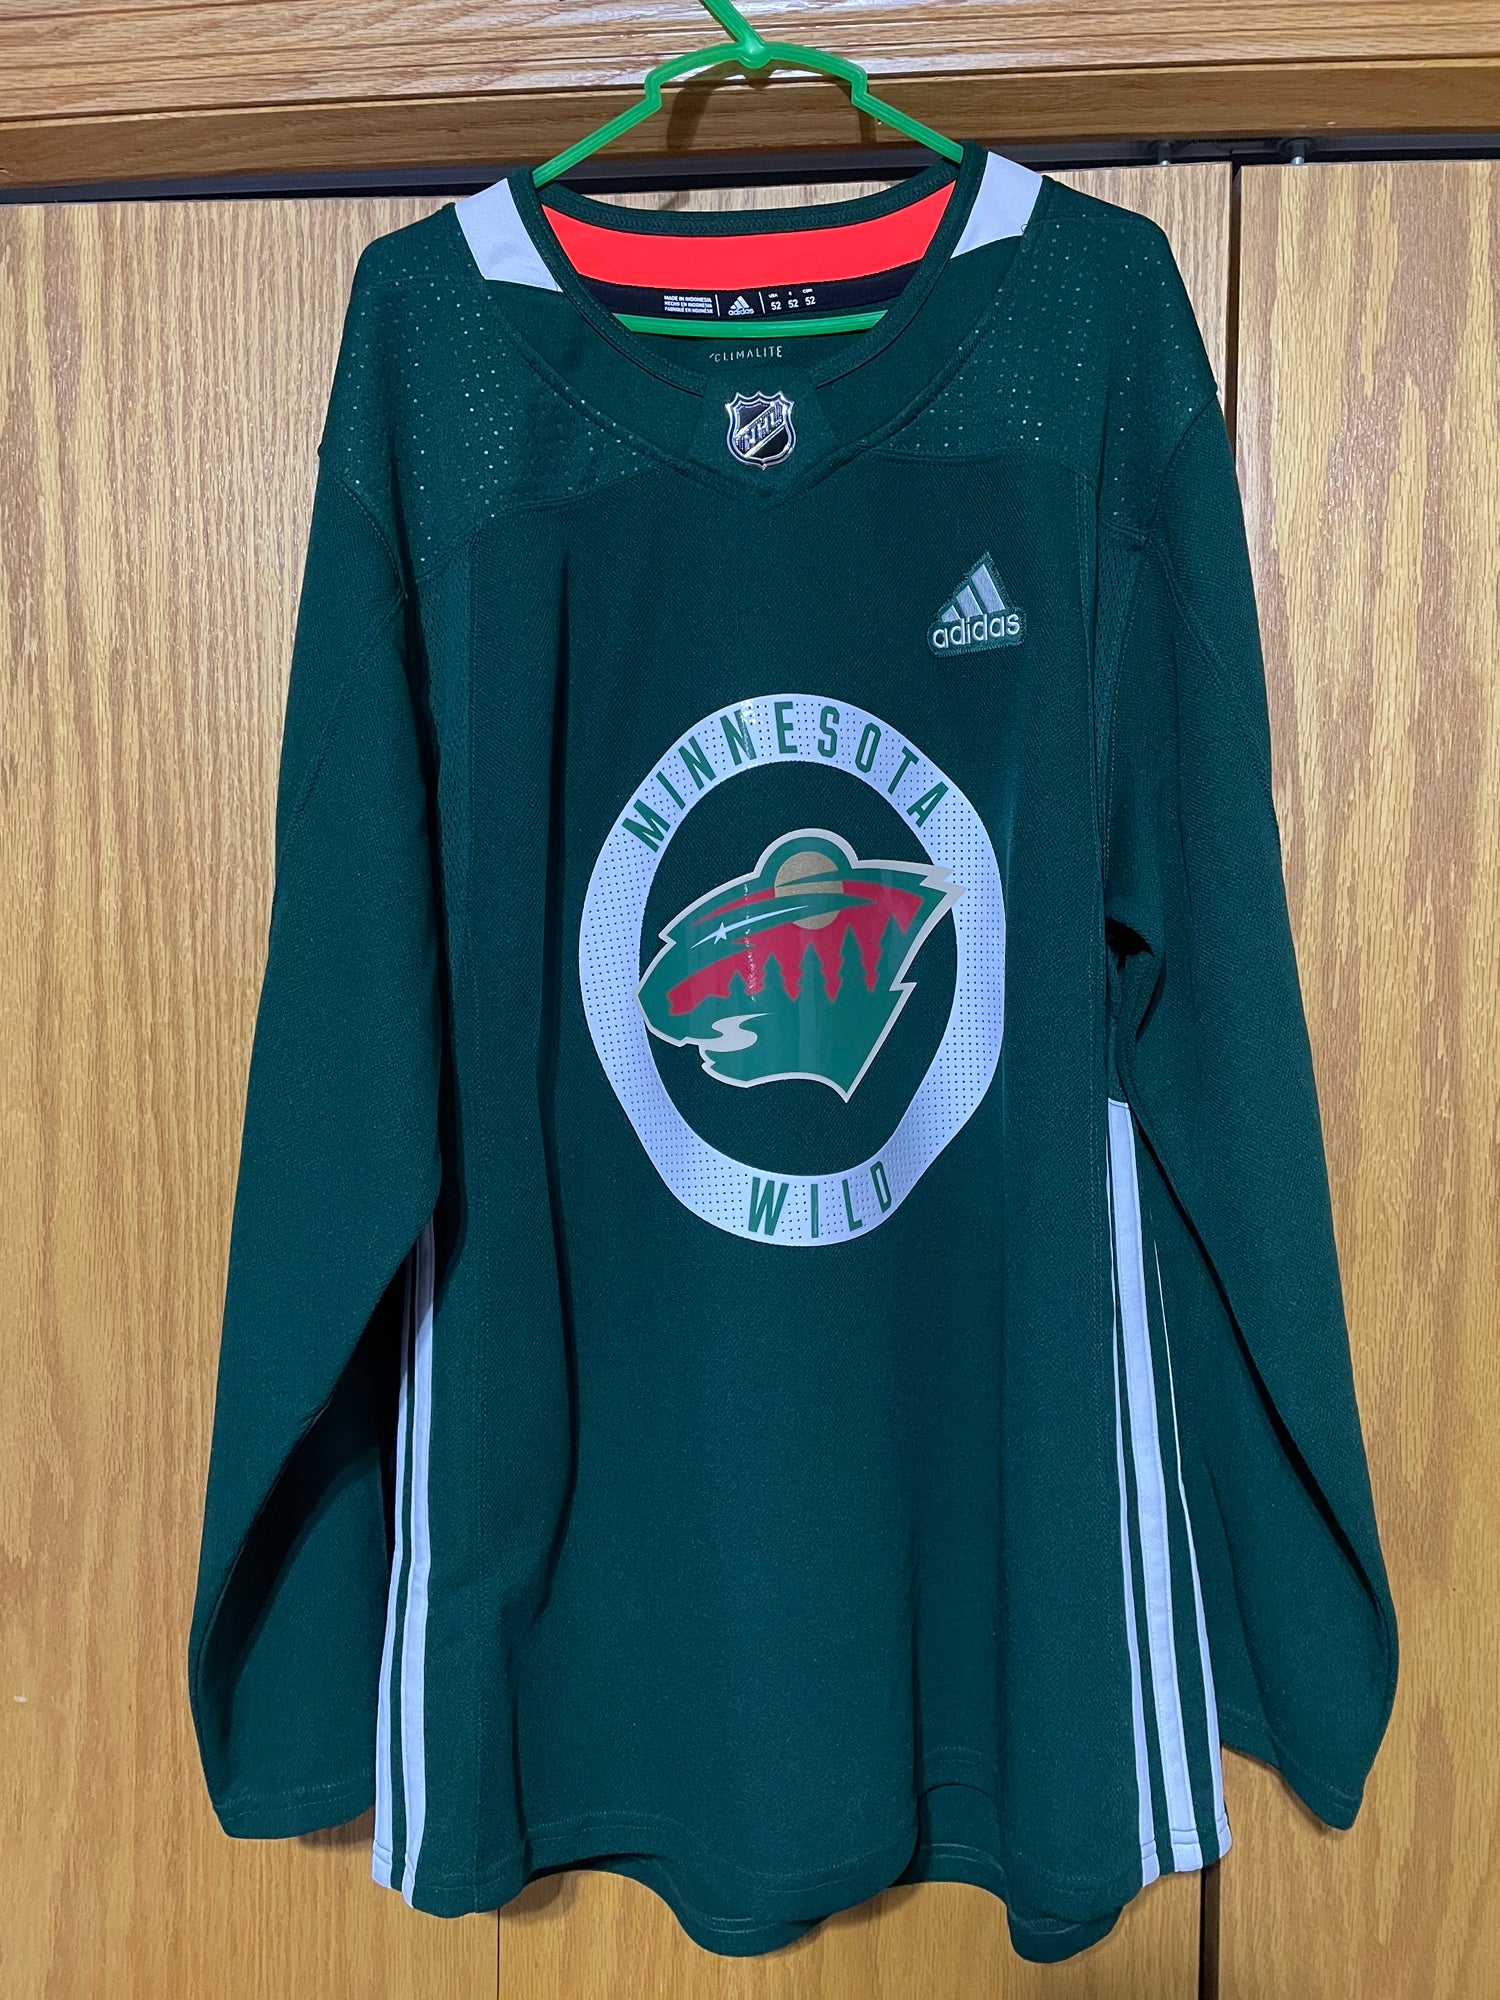 Pre owned authentic size 50 Minnesota Wild away jersey